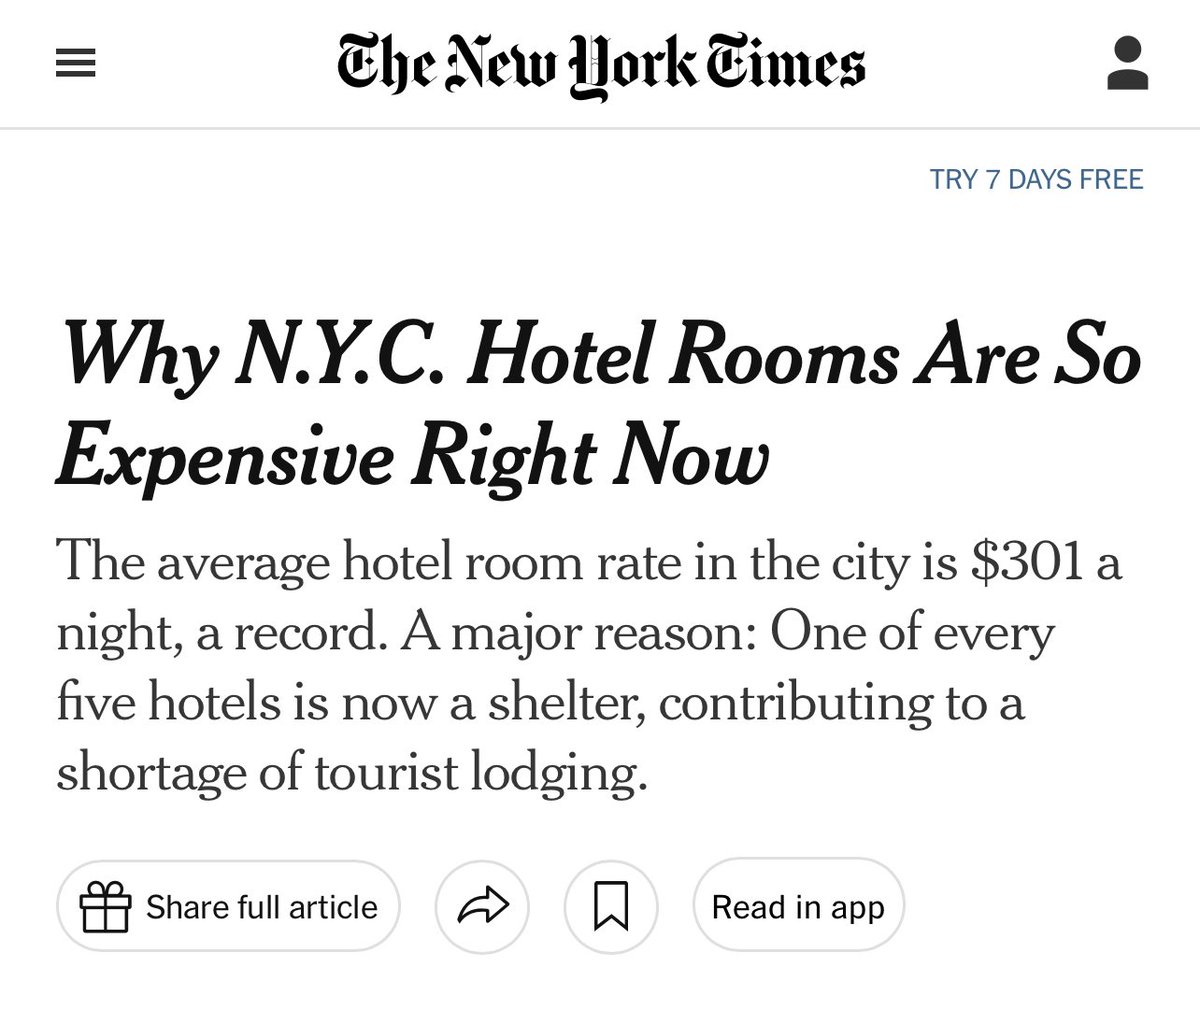 Basic Economics 101 (Supply & Demand)

•NYC is using 16,532 hotel rooms as migrant shelters.

•Available Airbnbs at 3,705 (down from 22,000) prior to the ban

—This is why lodging in New York has skyrocketed as travelers are paying record high prices for stays.

This isn’t